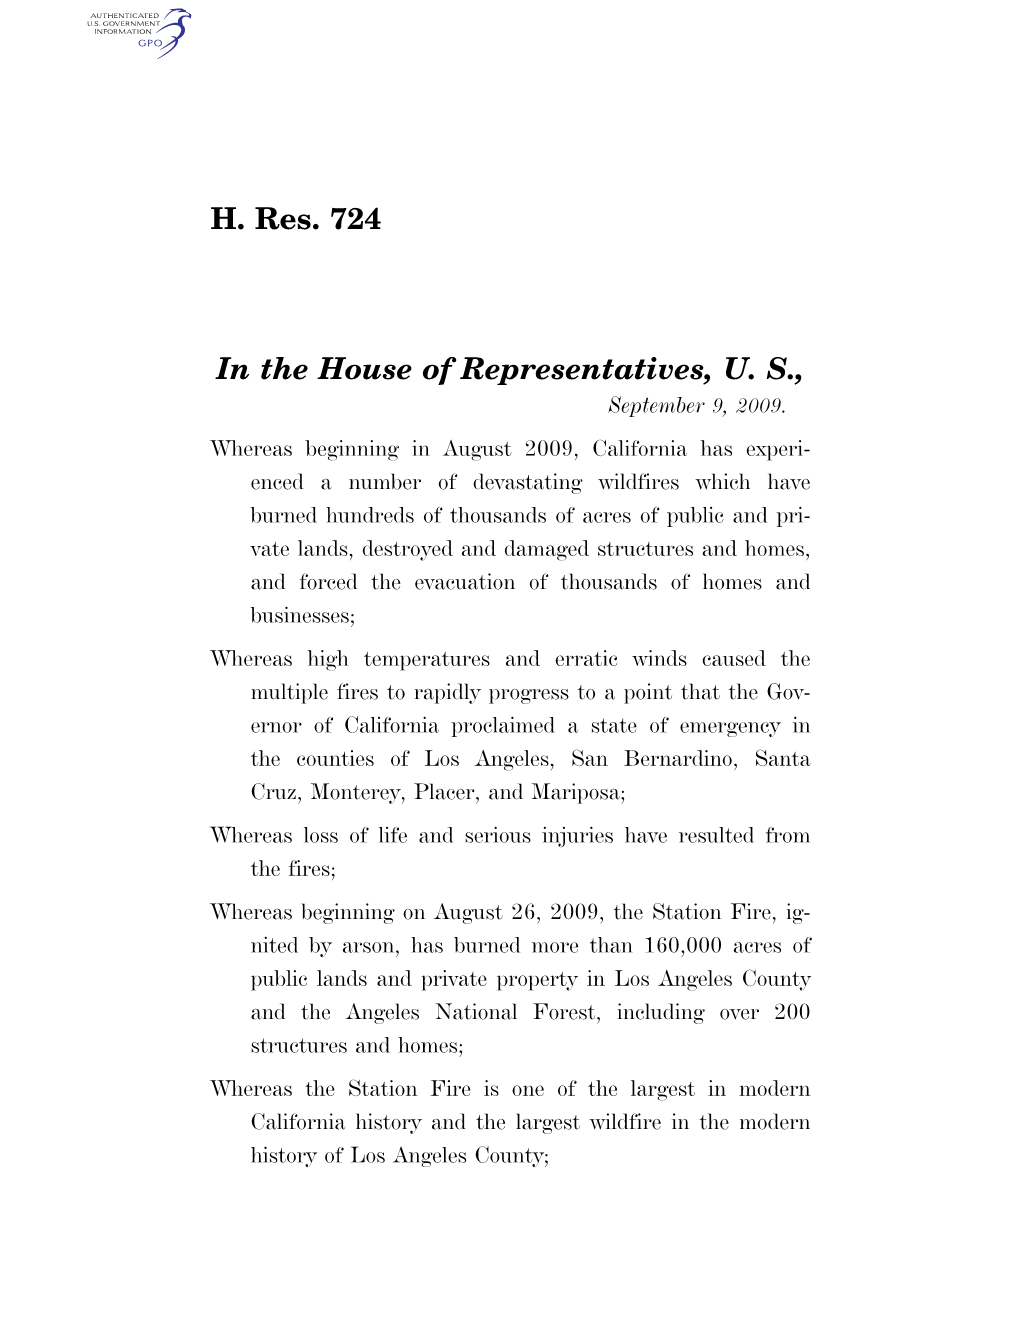 H. Res. 724 in the House of Representatives, U